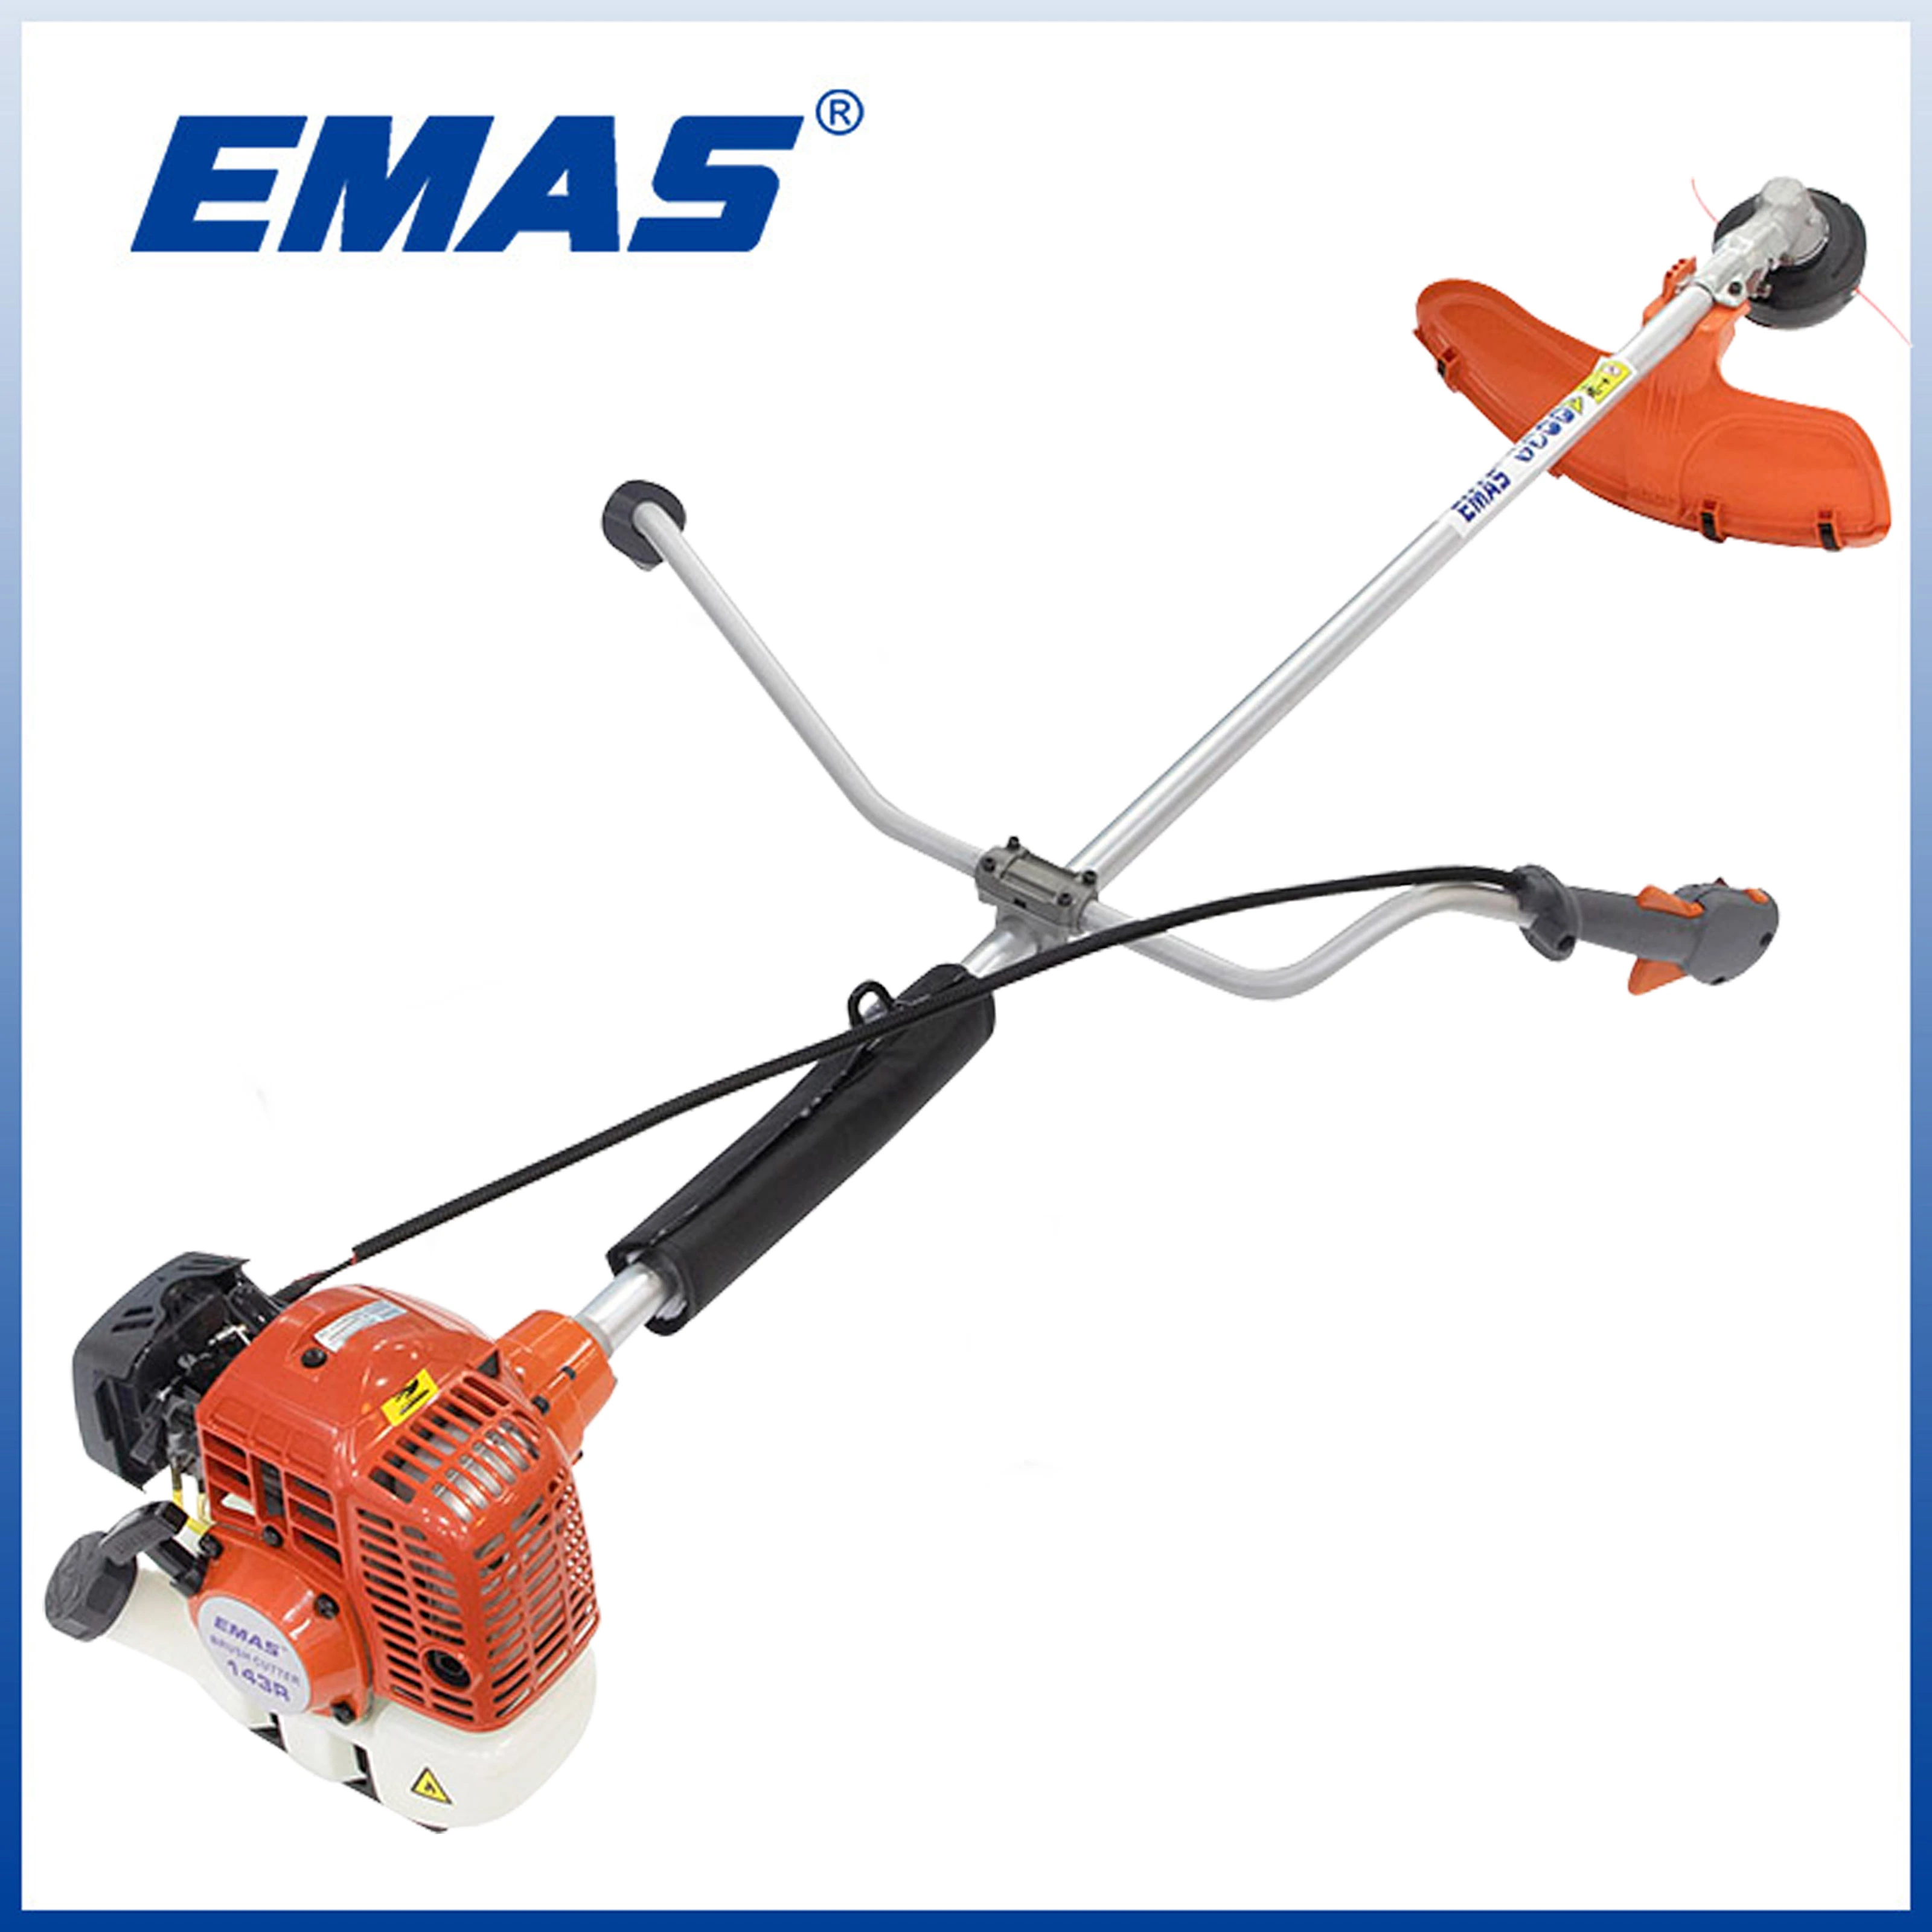 EMAS New Model Professional Grass Trimmer Eh143r Brush Cutter In 43 سم مكعب